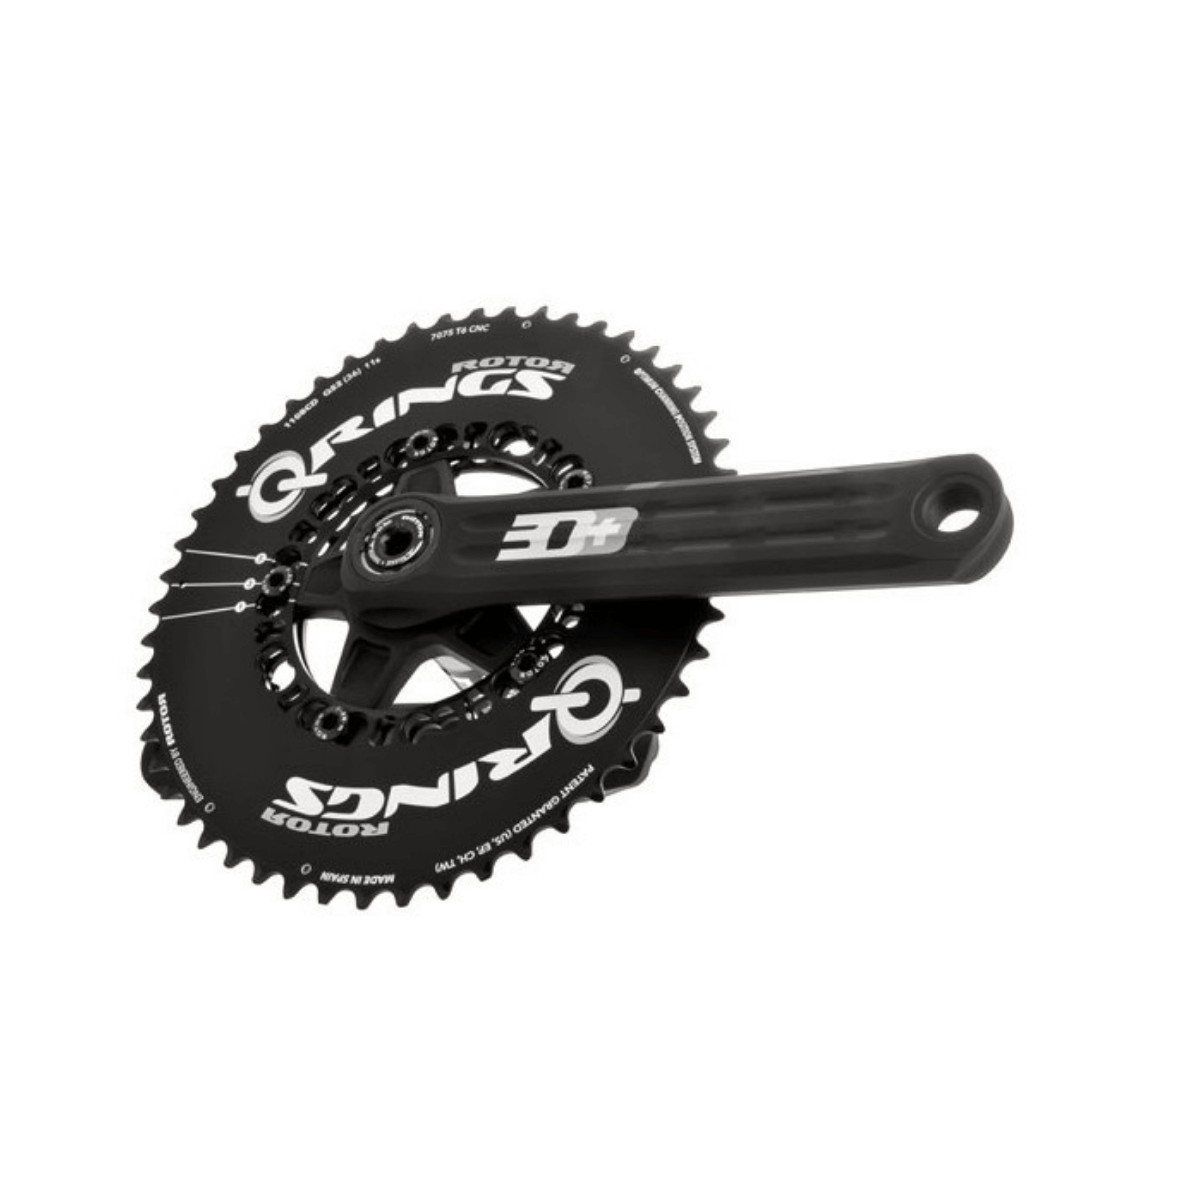 Rotor 3D + cranks with INpower power meter + Q-Rings Aero 50/34 chainrings, Connecting Rod Length 172,5 mm